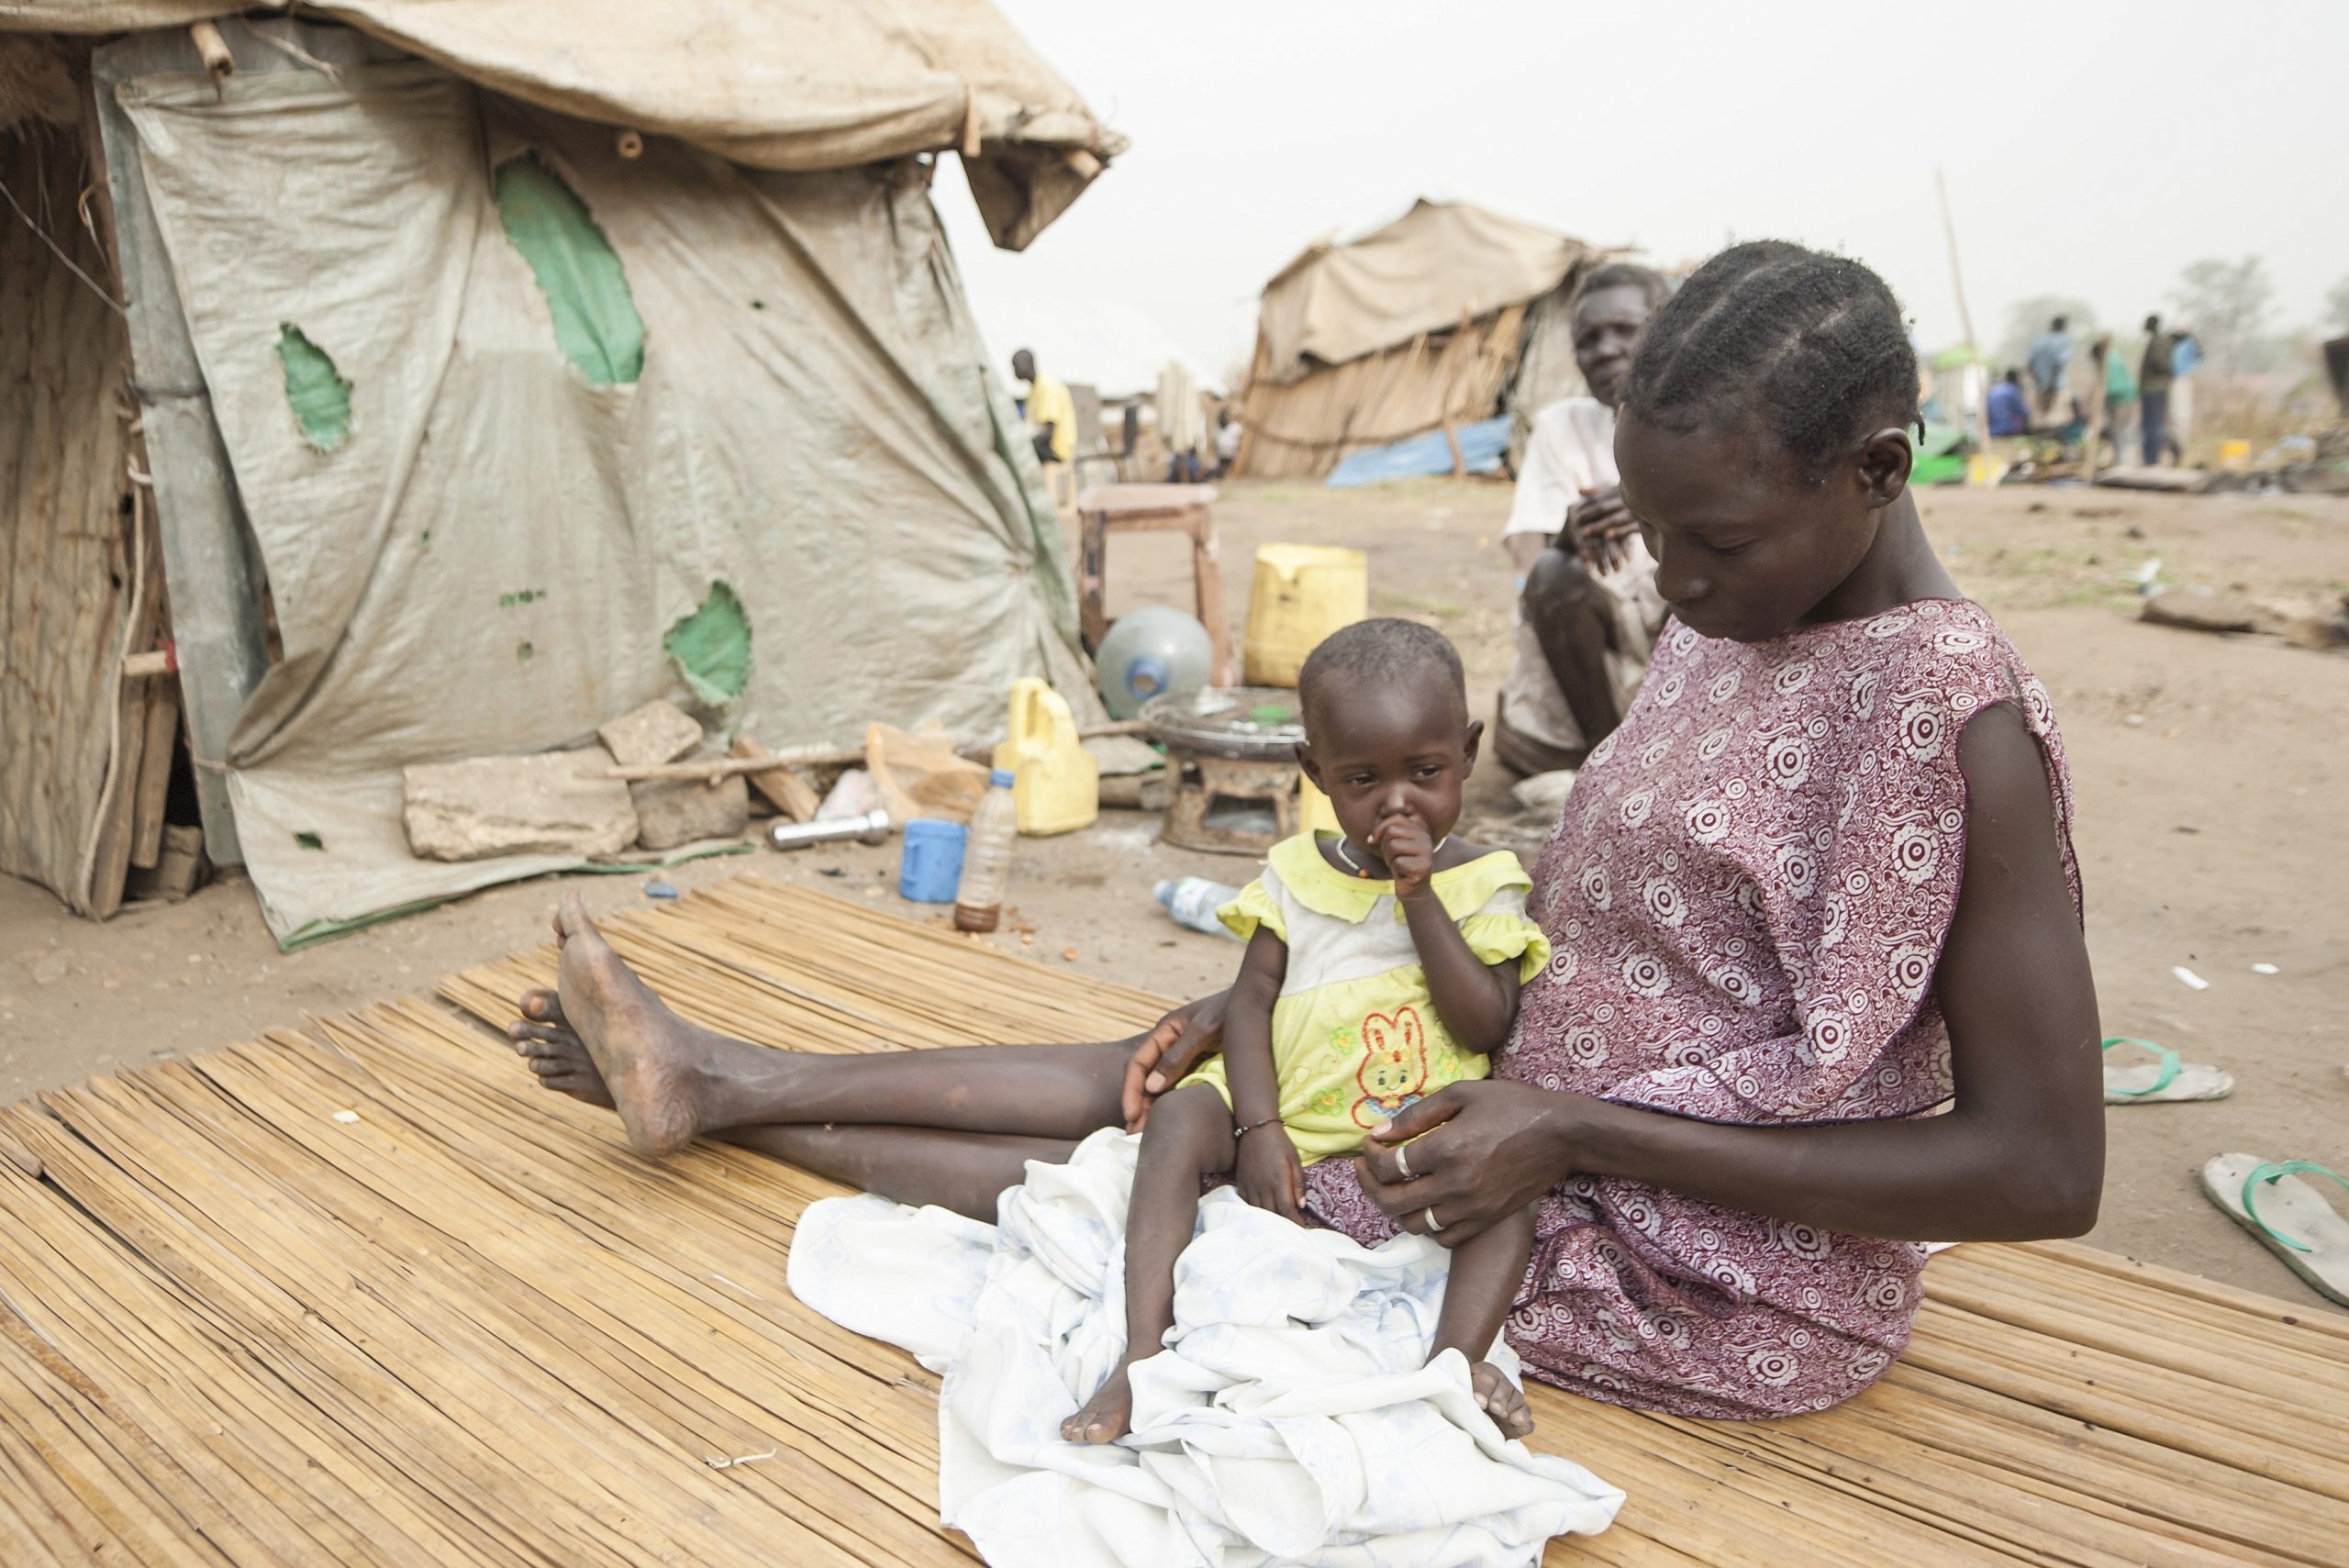 Juba, South Sudan - February 28th, 2012: Unidentified woman sits with her daughter in front of his hovel in displaced persons camp, Juba, South Sudan. Refugees stay in harsh conditions in camps of Juba.